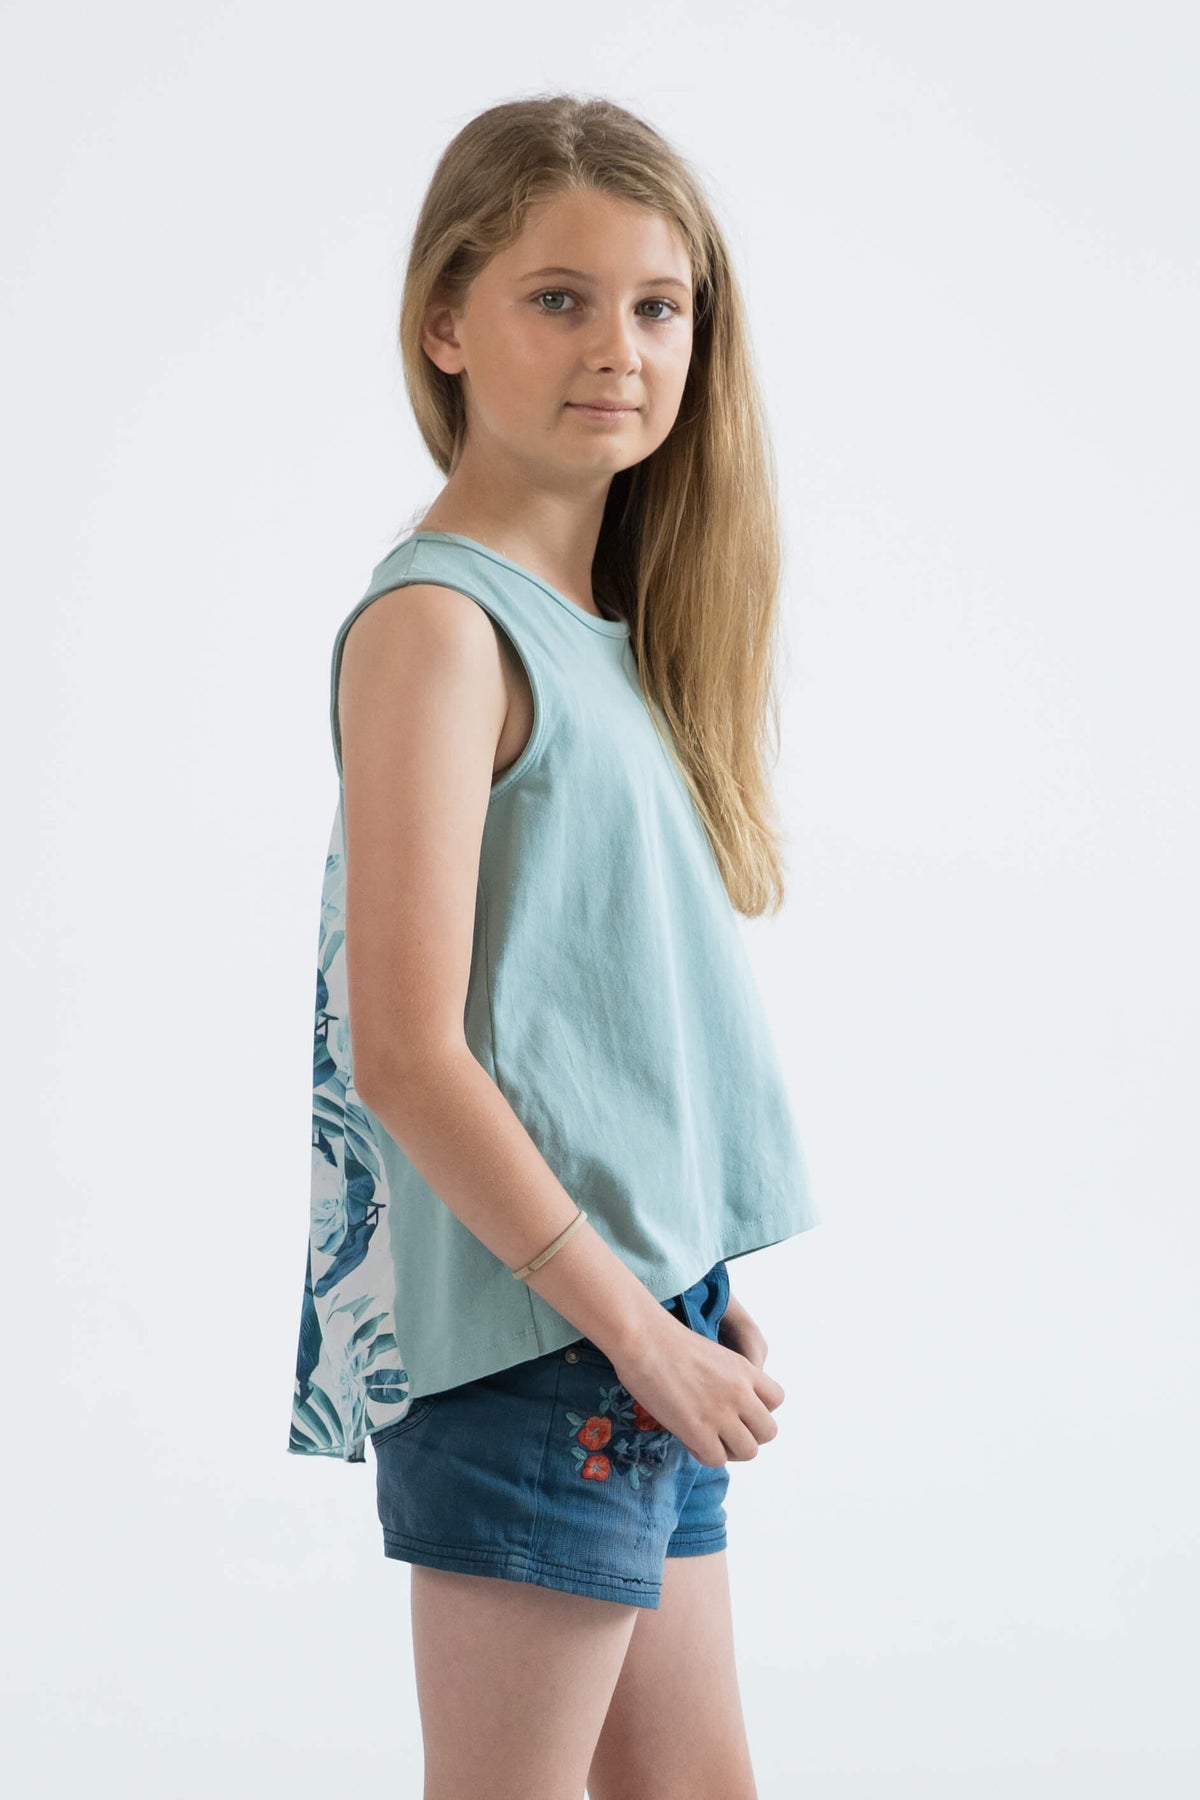 mint green teen girls clothing sleeveless singlet top floral print by Love Haidee Australia side view